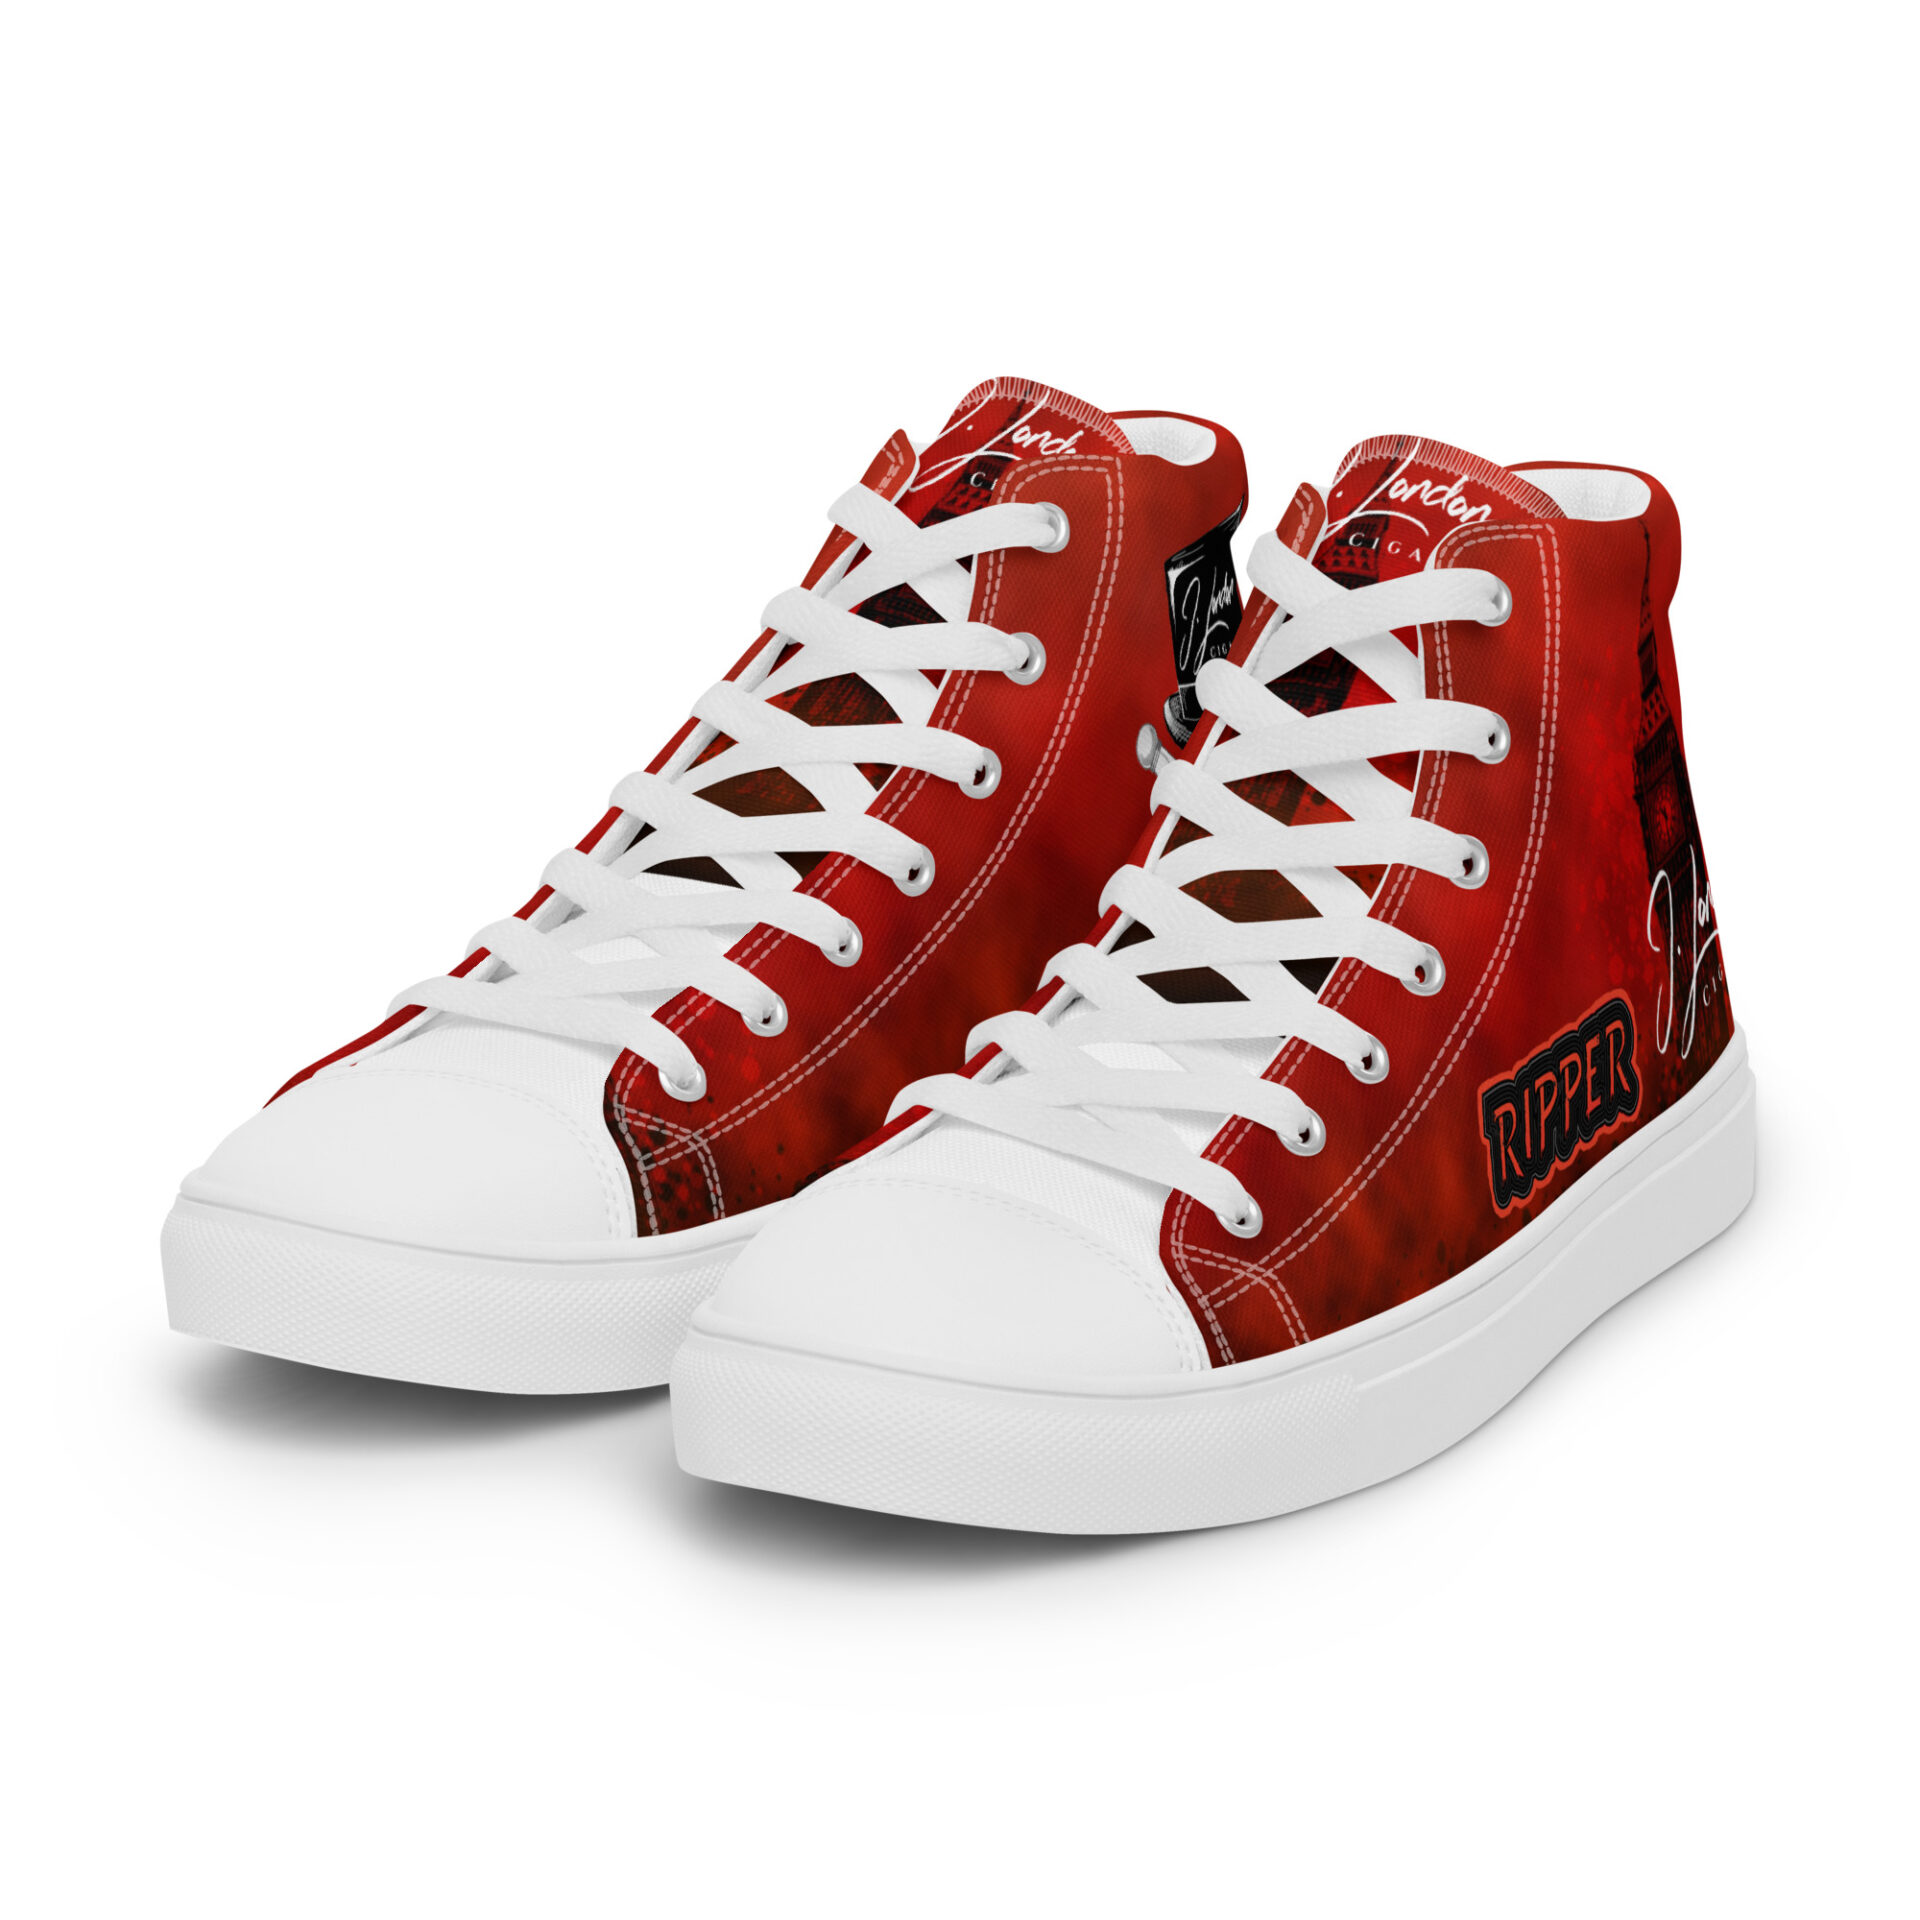 The Ripper Canvas High Top Sneakers - J. London Brands